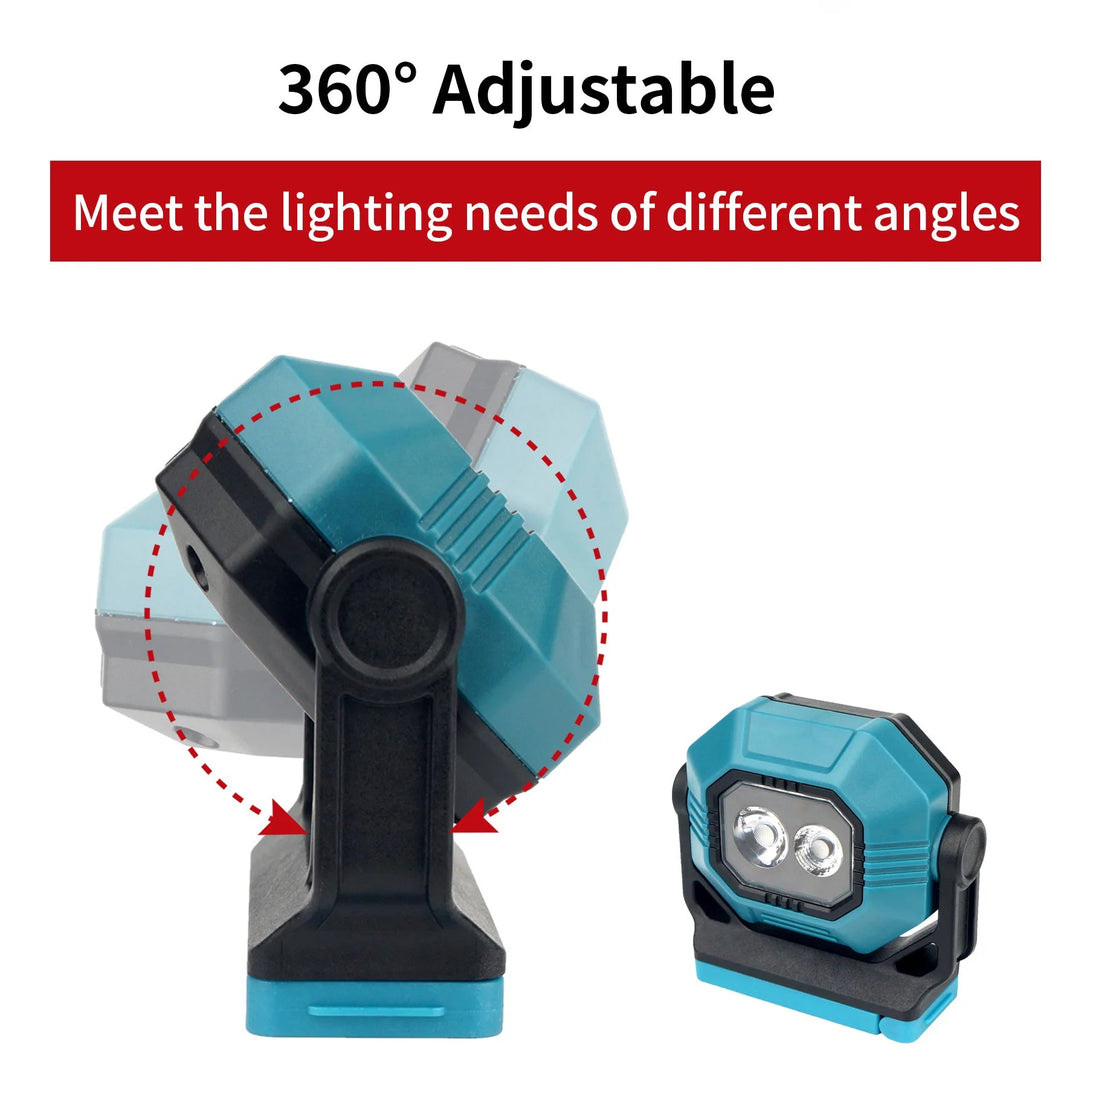 Adjustable 360 Degree LED Rechargeable Flood Light with 2 modes